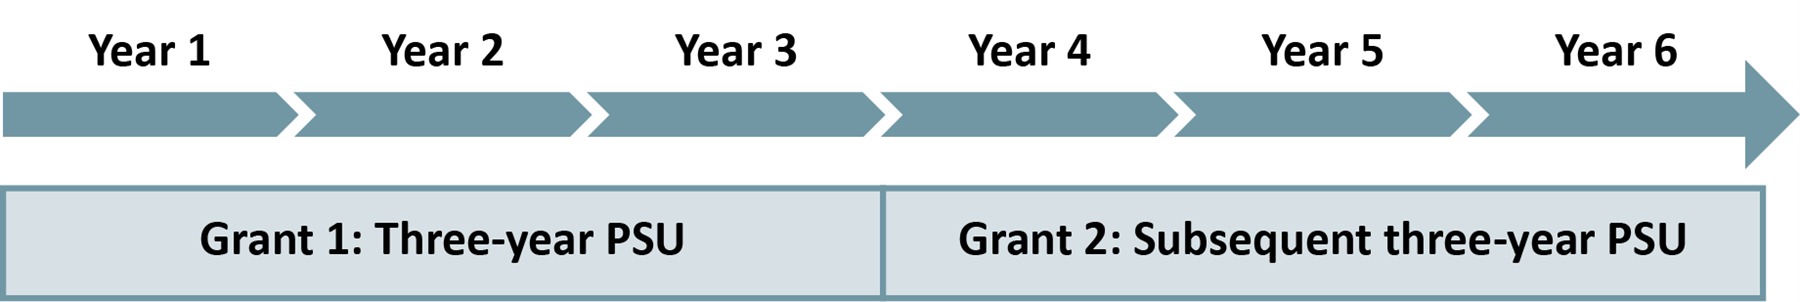 A PSU grant for incenting and rewarding defined and measured longer-term enterprise-wide performance-based target or milestone results, with a subsequent PSU grant once the original PSU plan has expired.